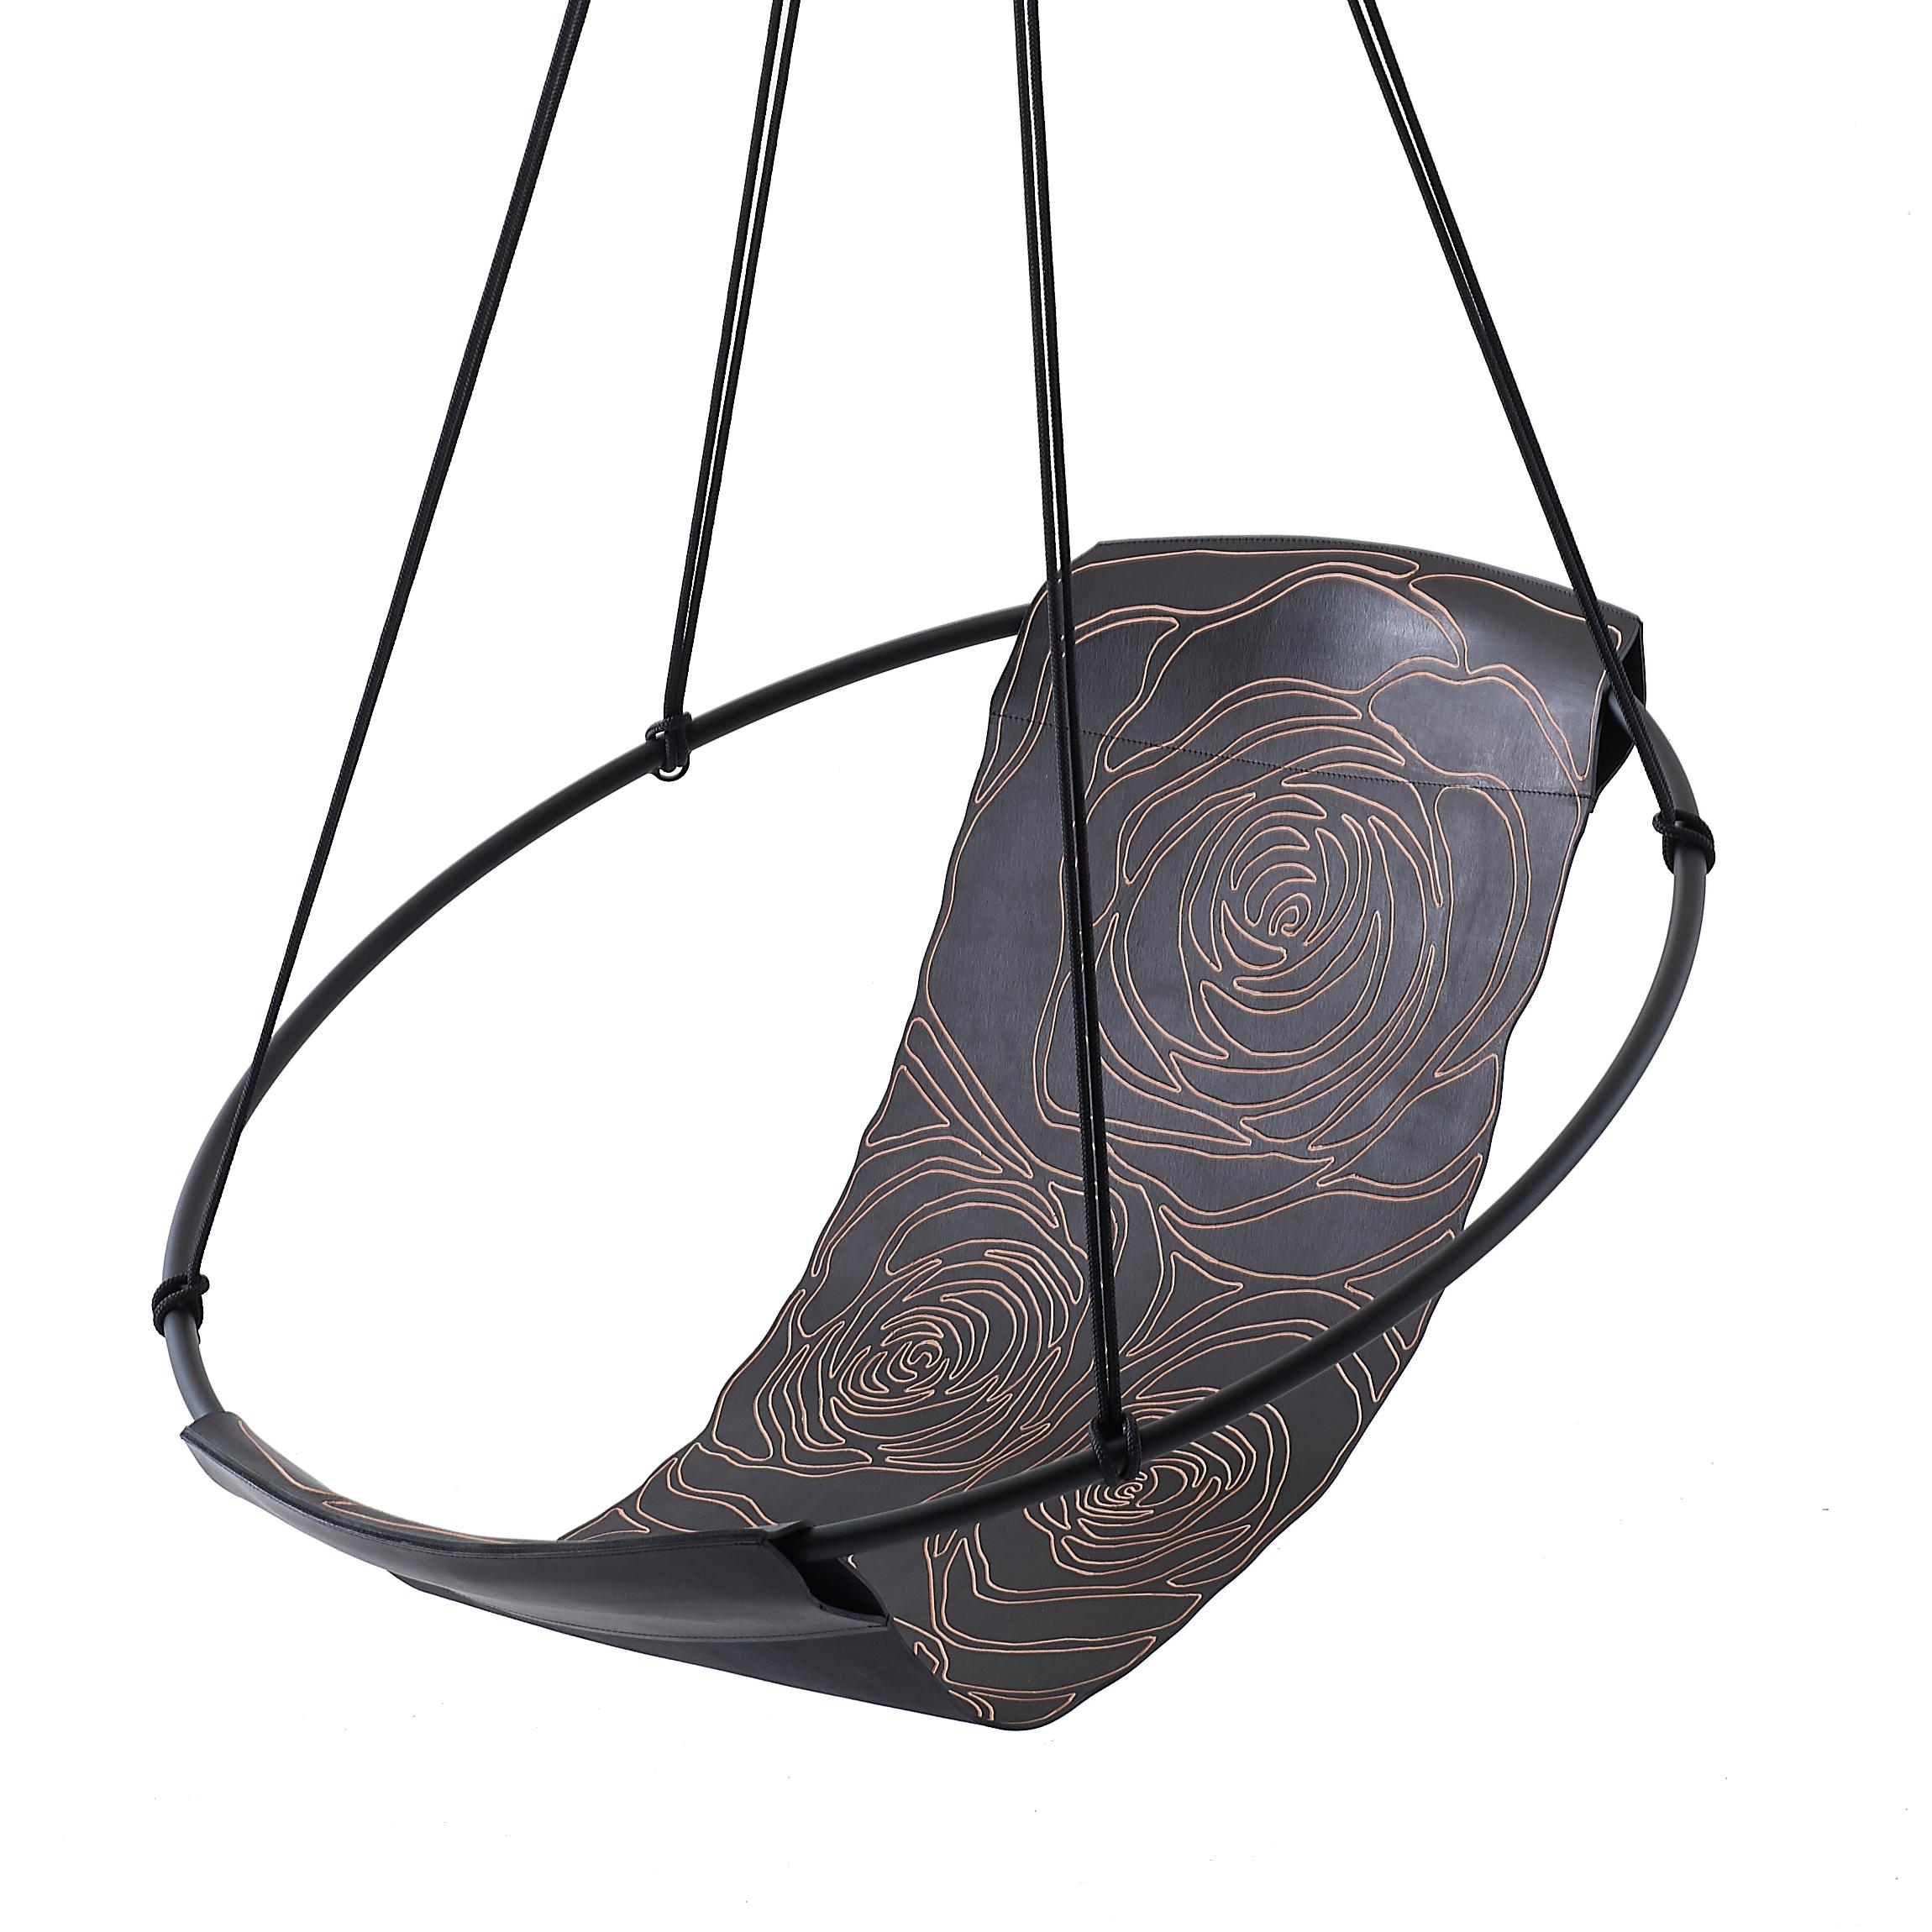 Each Rose design Sling hanging chair has been handcrafted by our leather artisans. The rose pattern in this model has been engraved into thick veg tan leather.

Stripped away from all excess, this hanging chair has a circular frame with the sheets